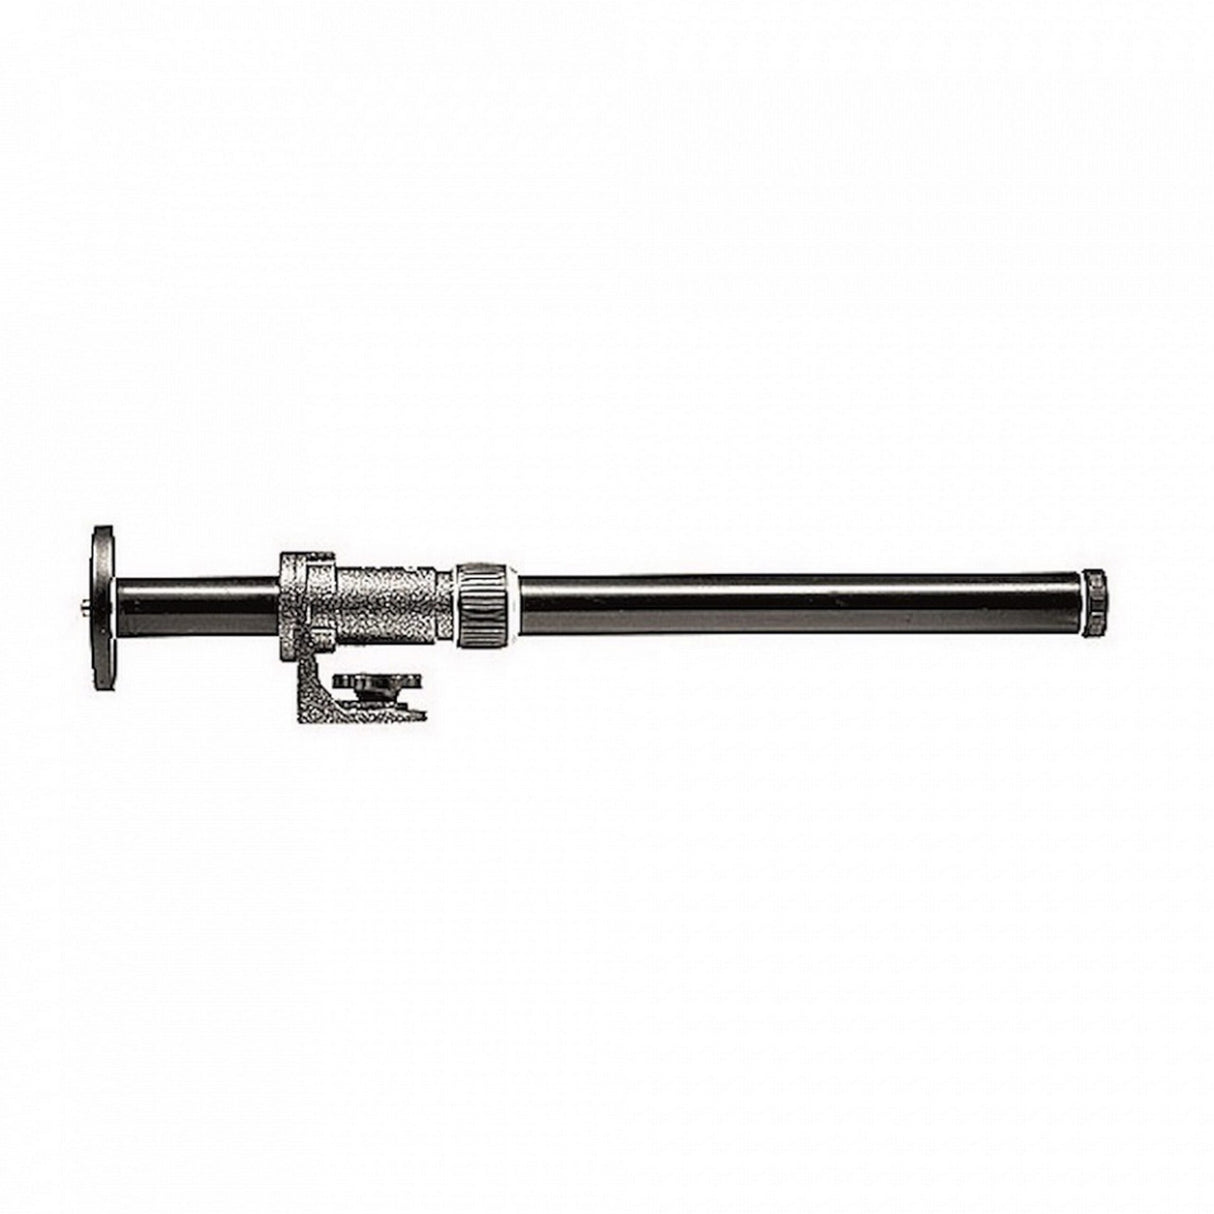 Gitzo G532 Rapid Lateral Arm for Tripods, Sliding Version